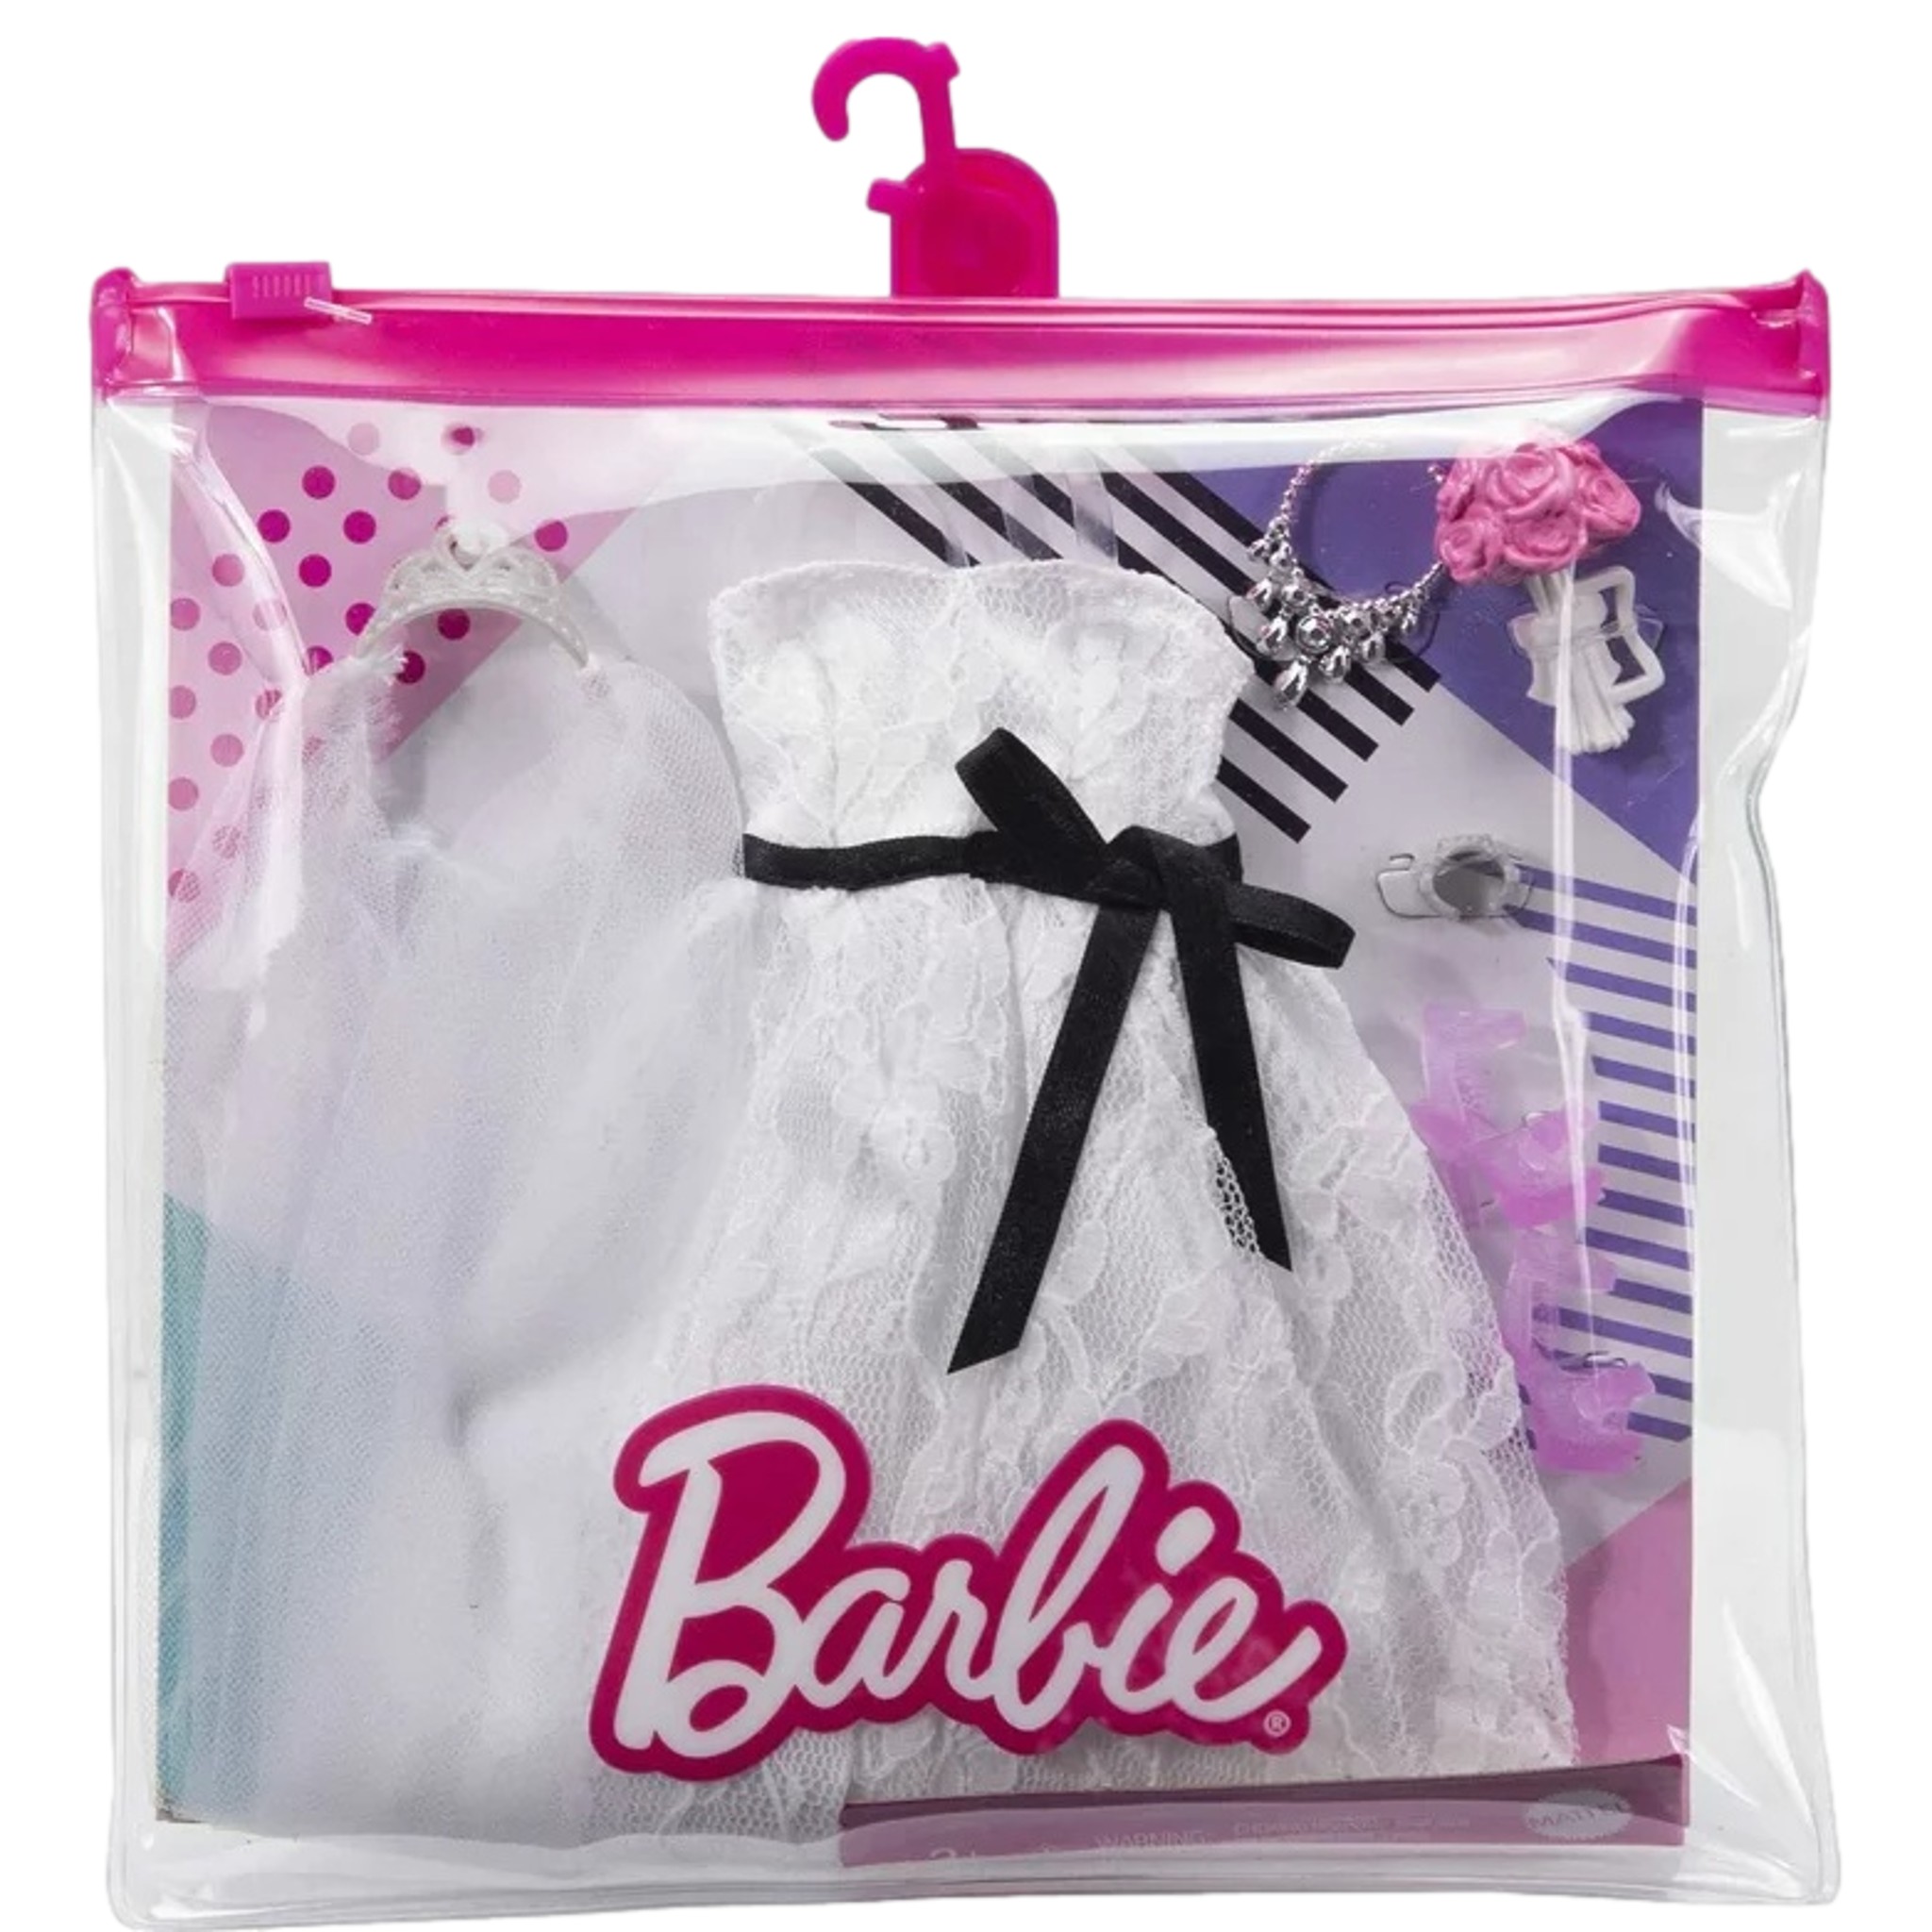 Barbie Wedding Fashion Pack Doll Clothes Set with Bridal Dress & 5 Accessories